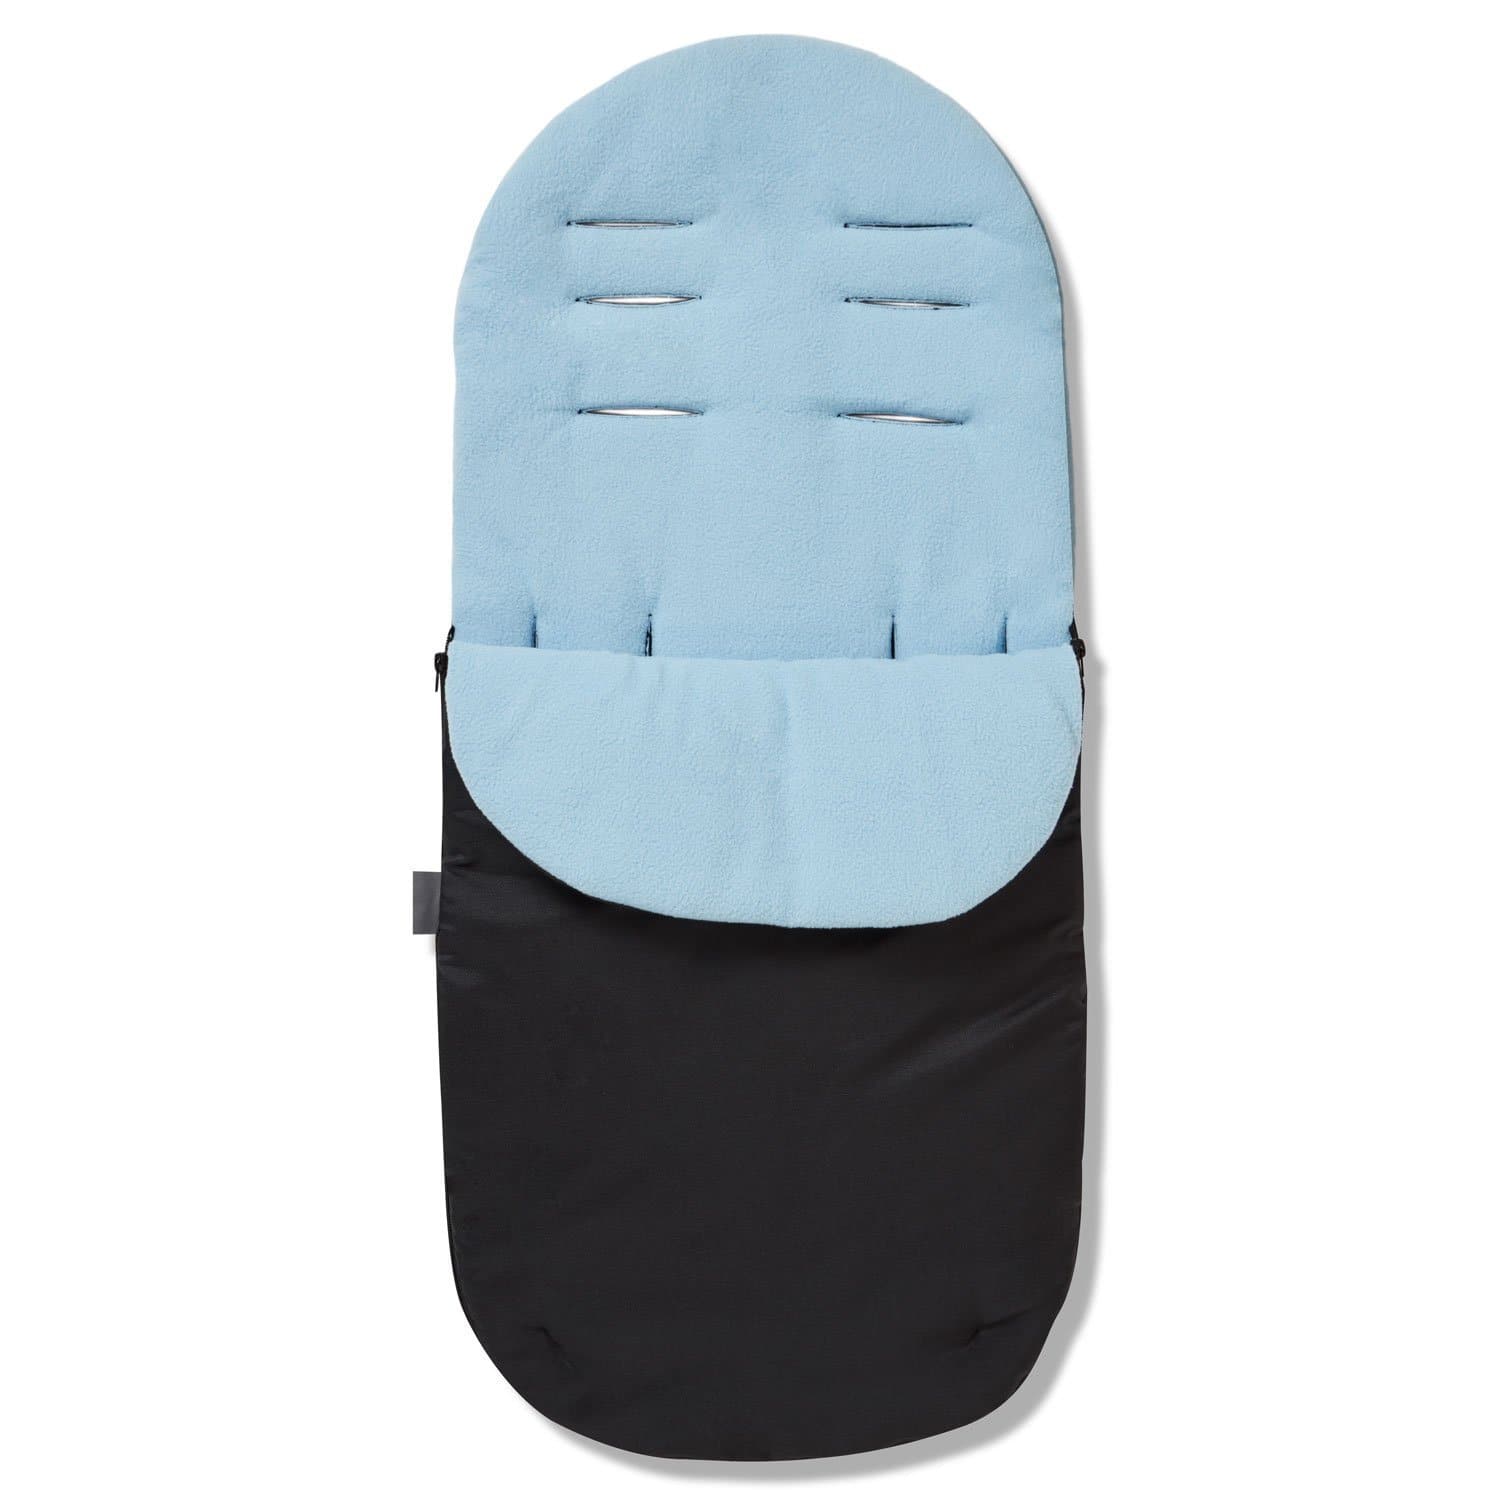 Footmuff / Cosy Toes Compatible with Baby Jogger - Light Blue / Fits All Models | For Your Little One